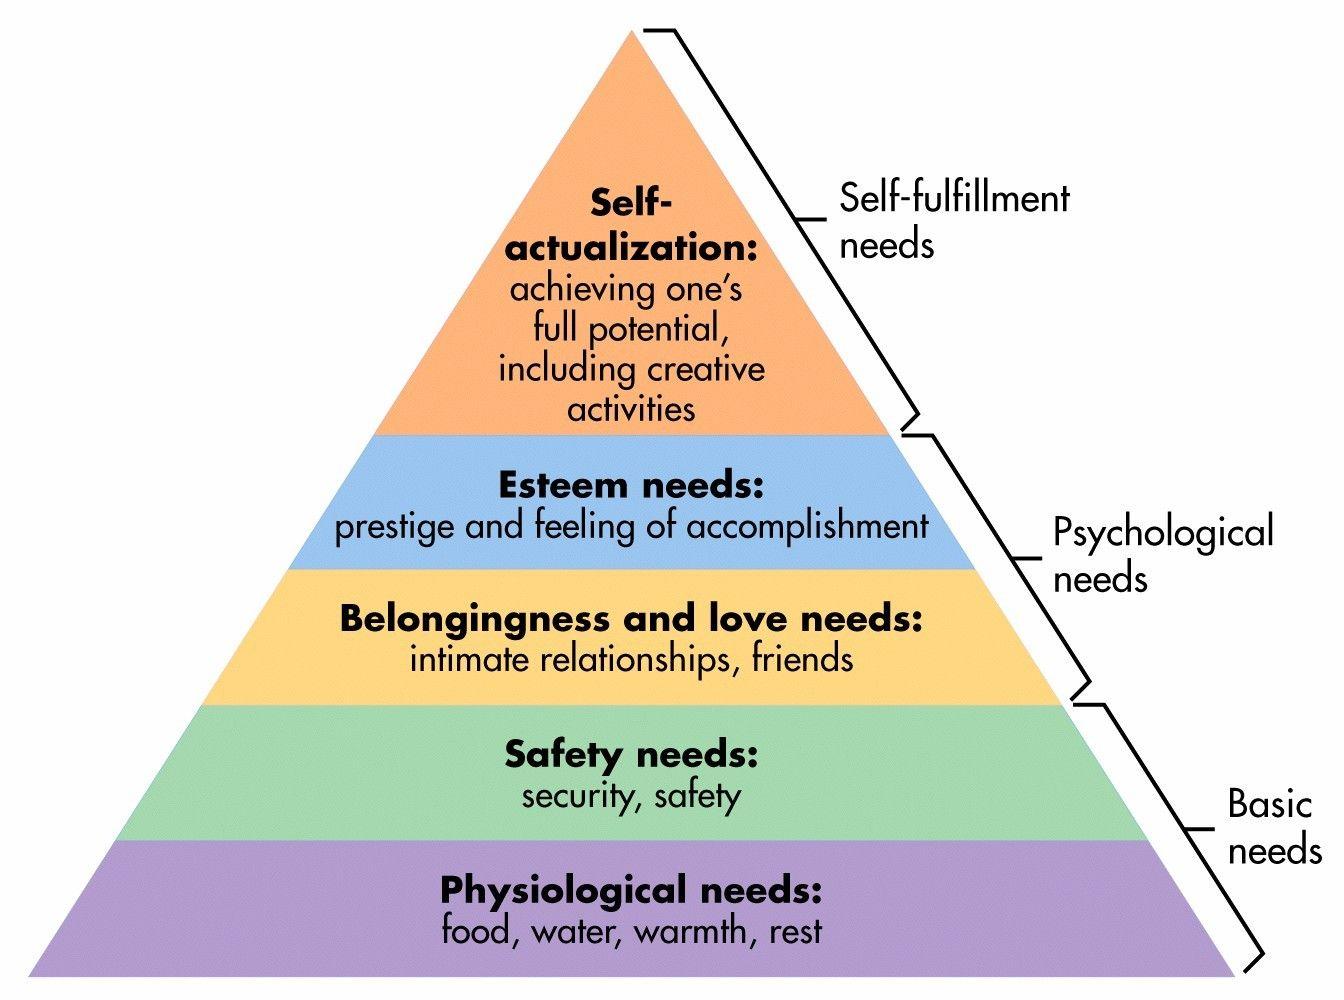 Image of the Maslow’s Hierarchy Of Needs model